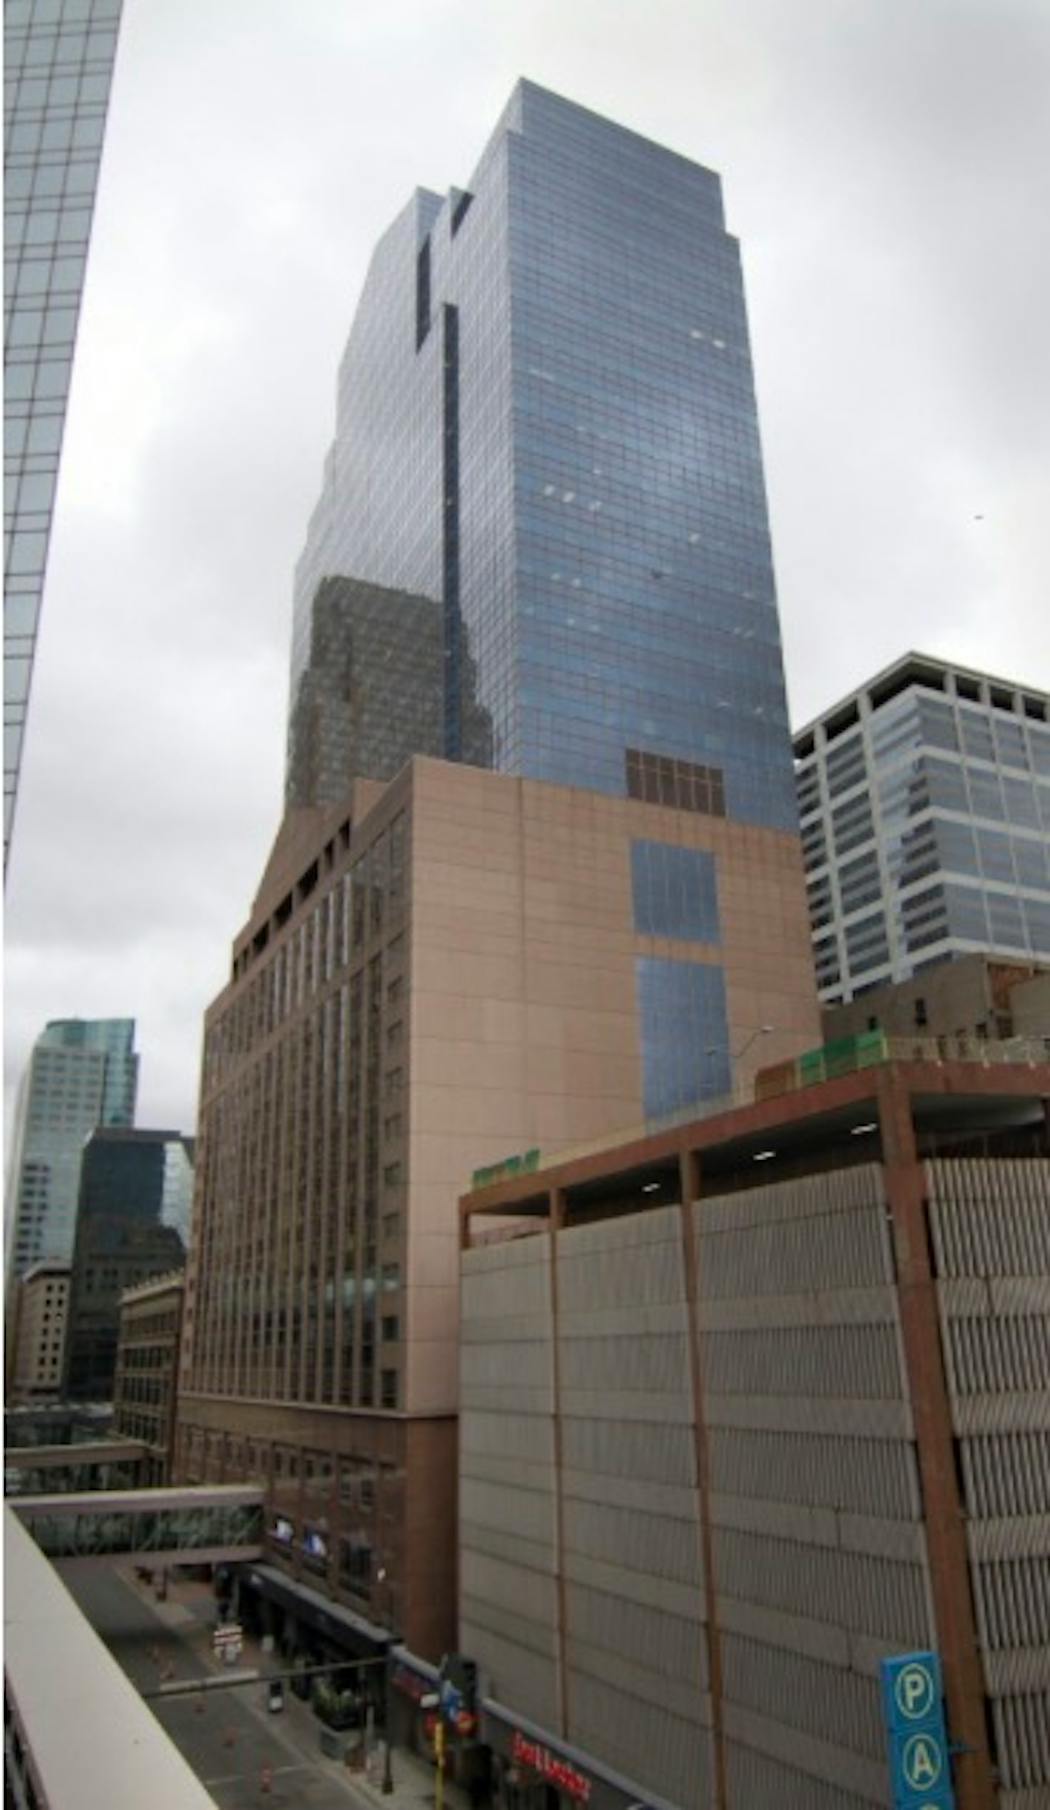 Plaza VII, now the PwC Tower